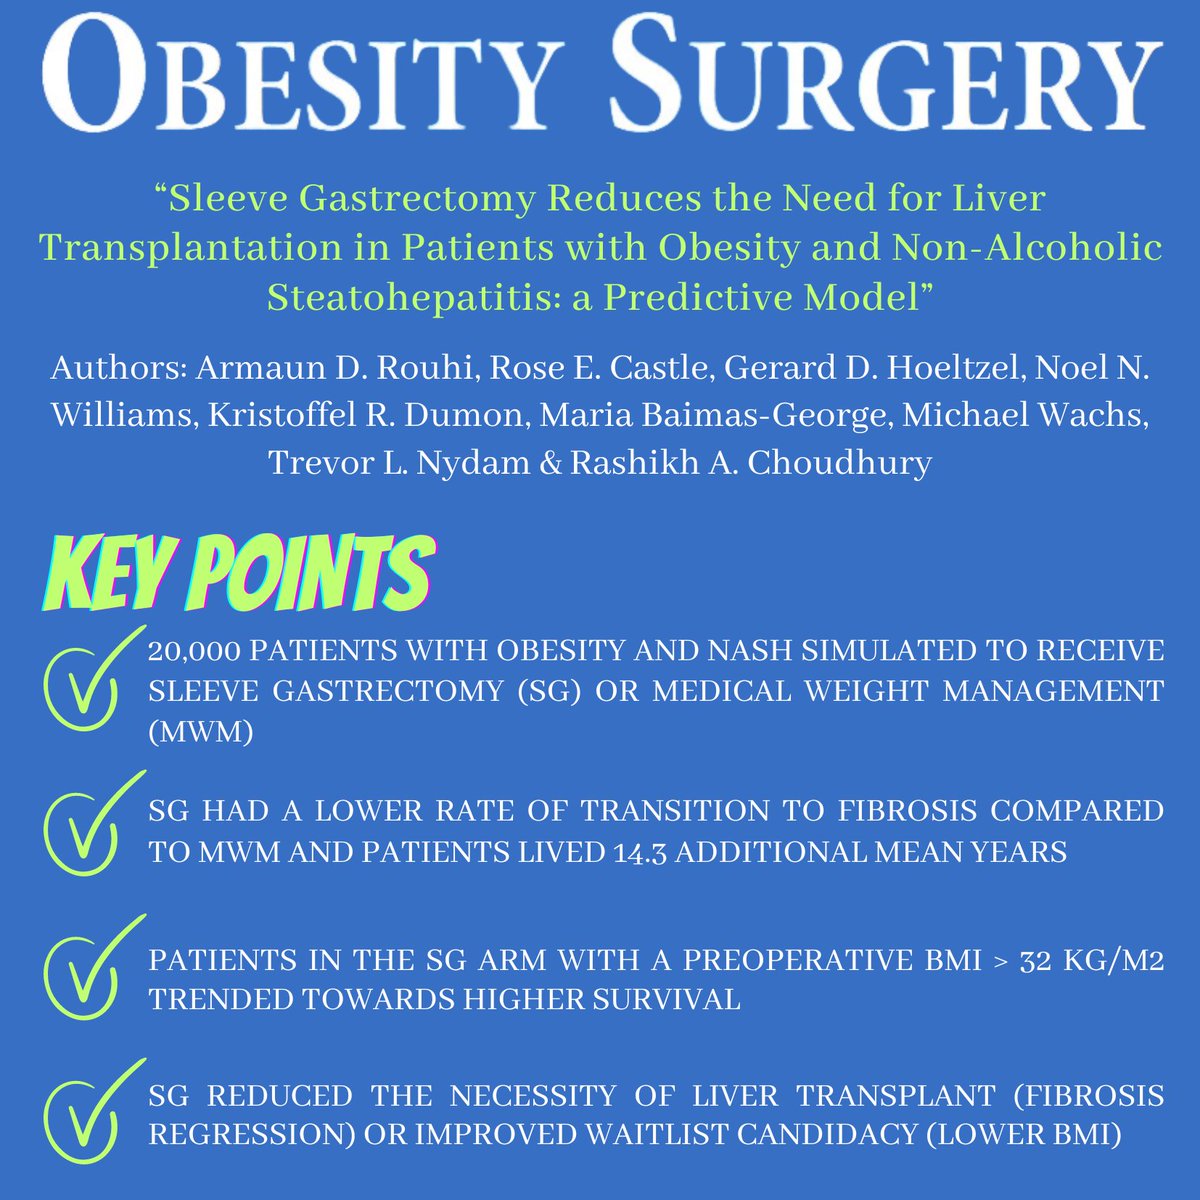 BEST PAPERS APRIL ISSUE 'Sleeve Gastrectomy Reduces the Need for Liver Transplantation in Patients with Obesity and Non-Alcoholic Steatohepatitis: a Predictive Model' DOI: doi.org/10.1007/s11695… FREE DOWNLOAD: rdcu.be/dFSXD